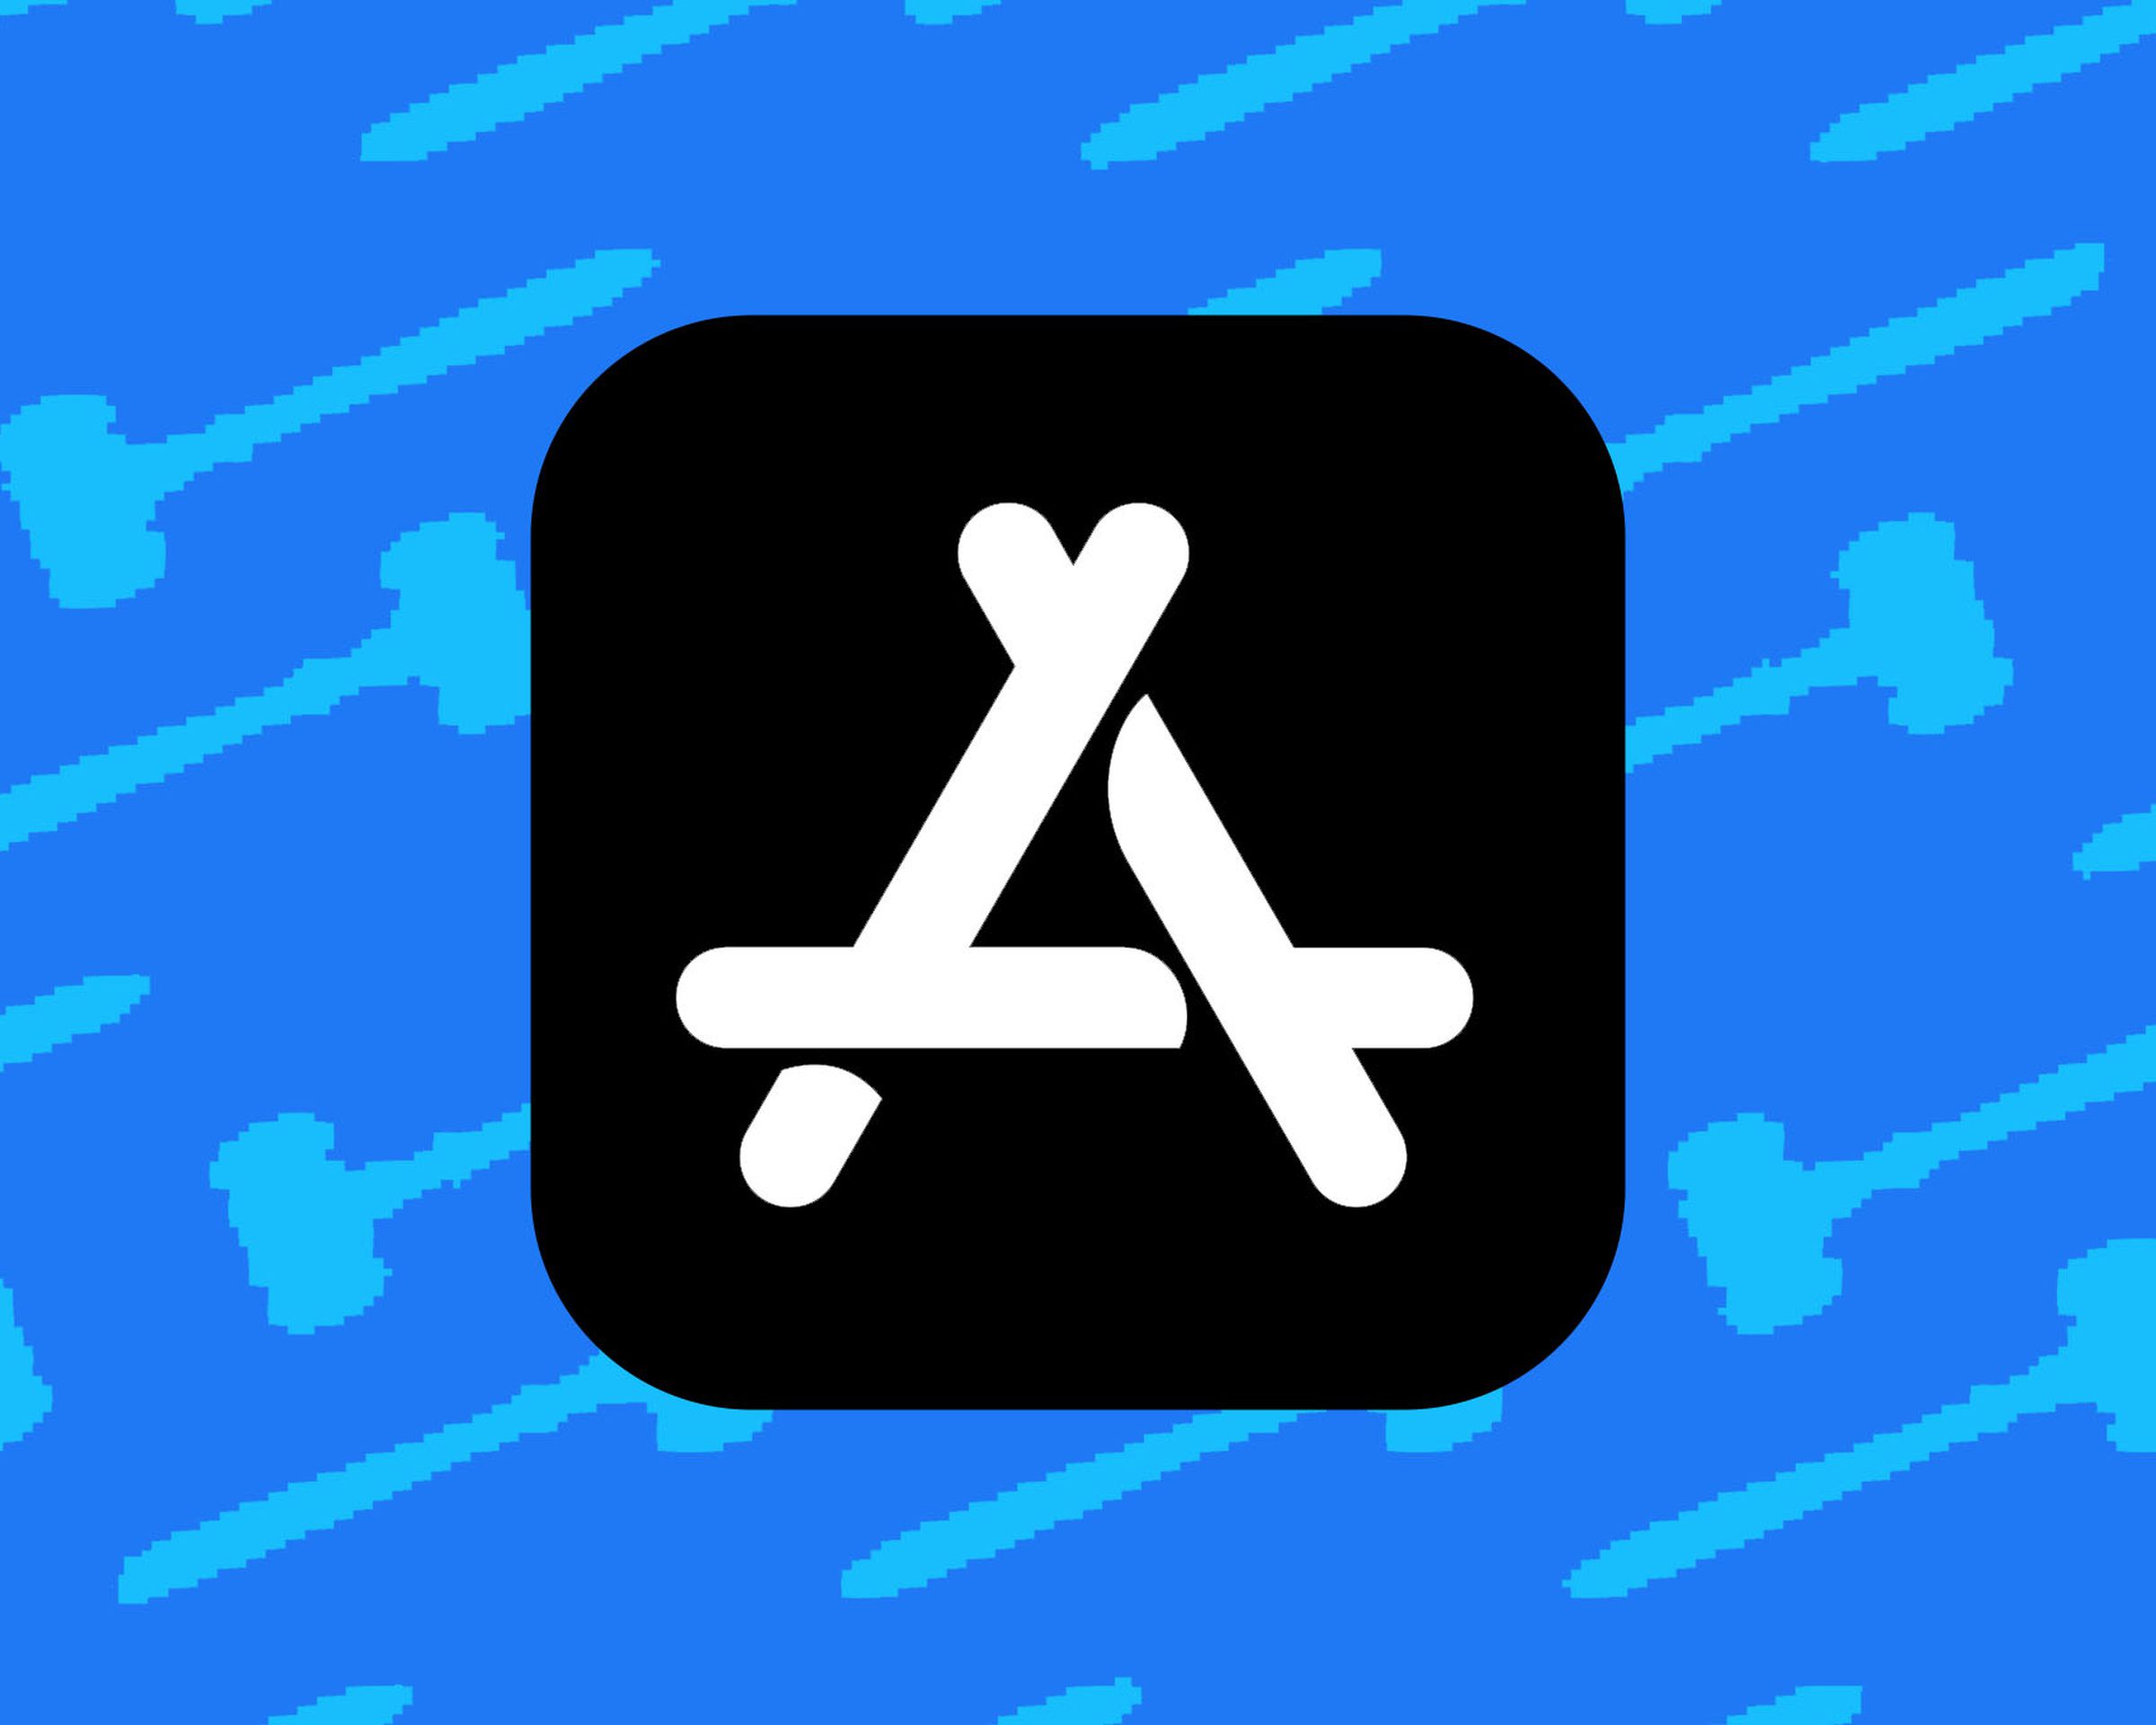 Illustration of the App Store logo in front of a background of gavels.